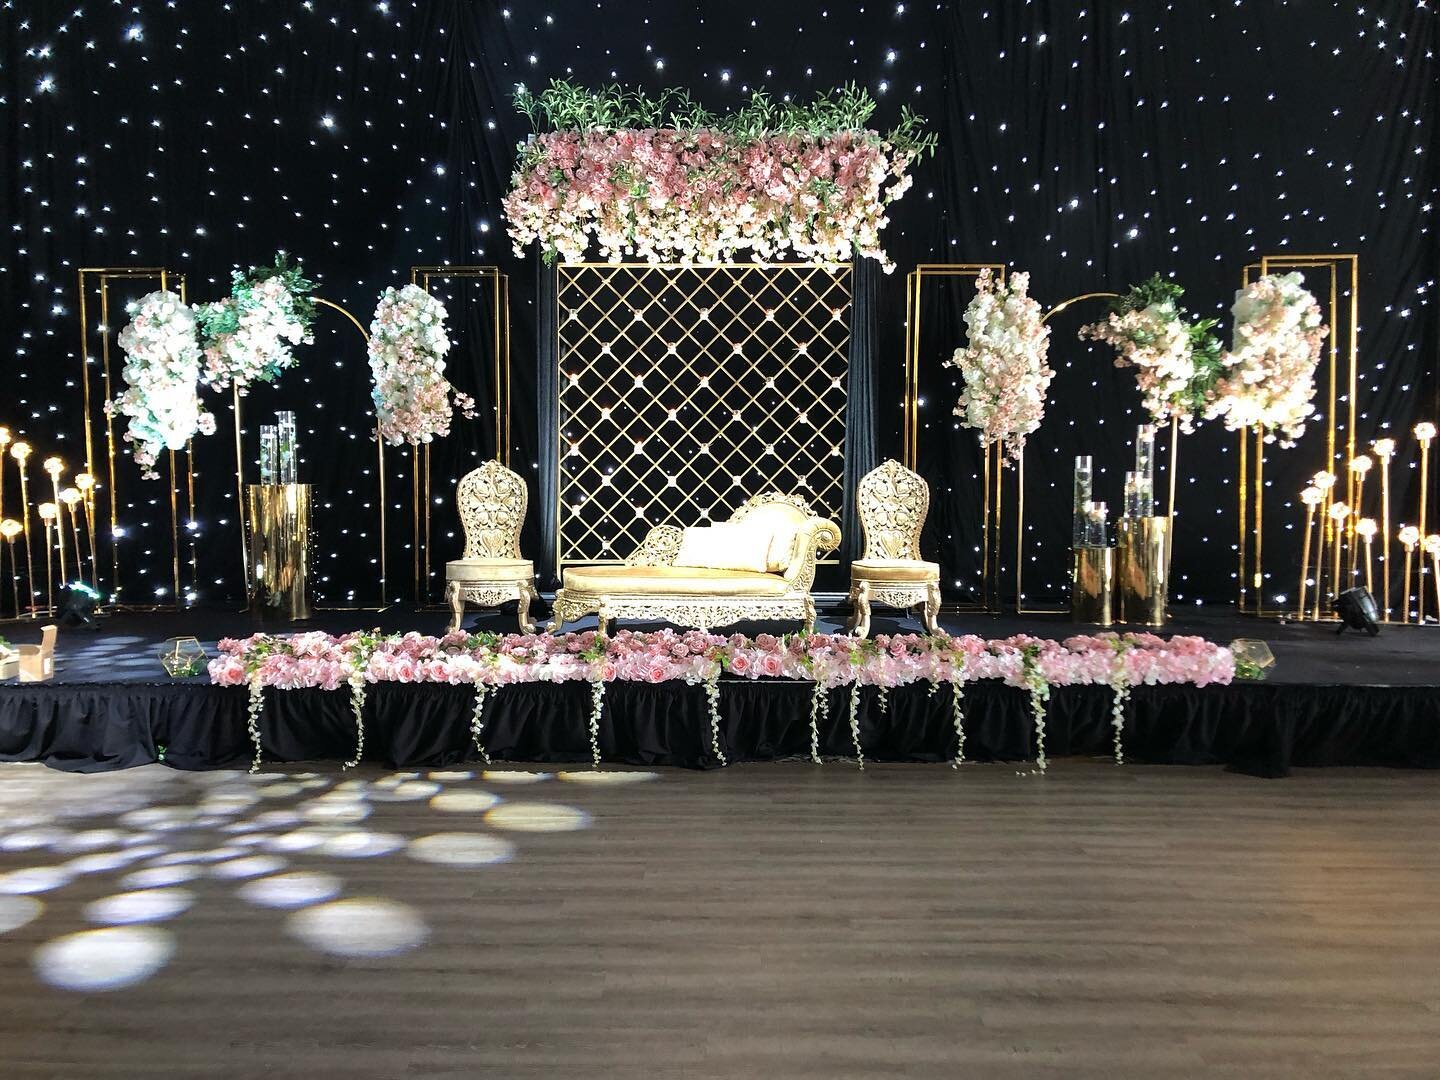 A Romantic Evening Stage Setup! How Gorgeous is this Event. Call us and don&rsquo;t wait to book your Special Wedding Day! Call our Professional Sales Team!